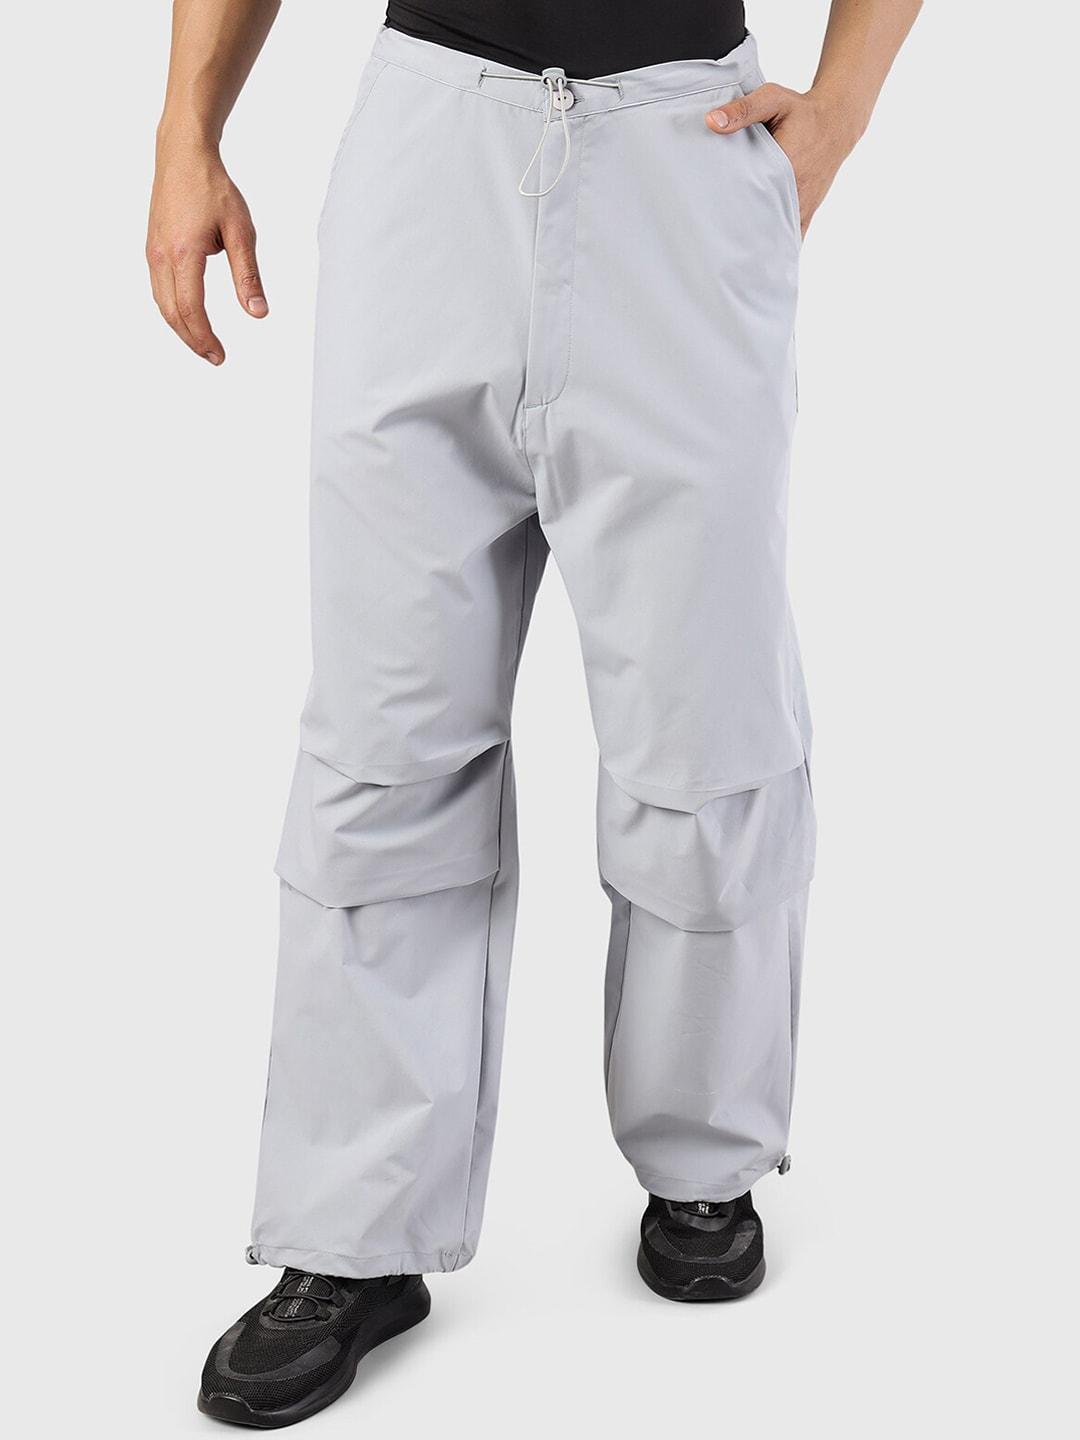 fuaark-men-mid-rise-antimicrobial-sports-track-pant